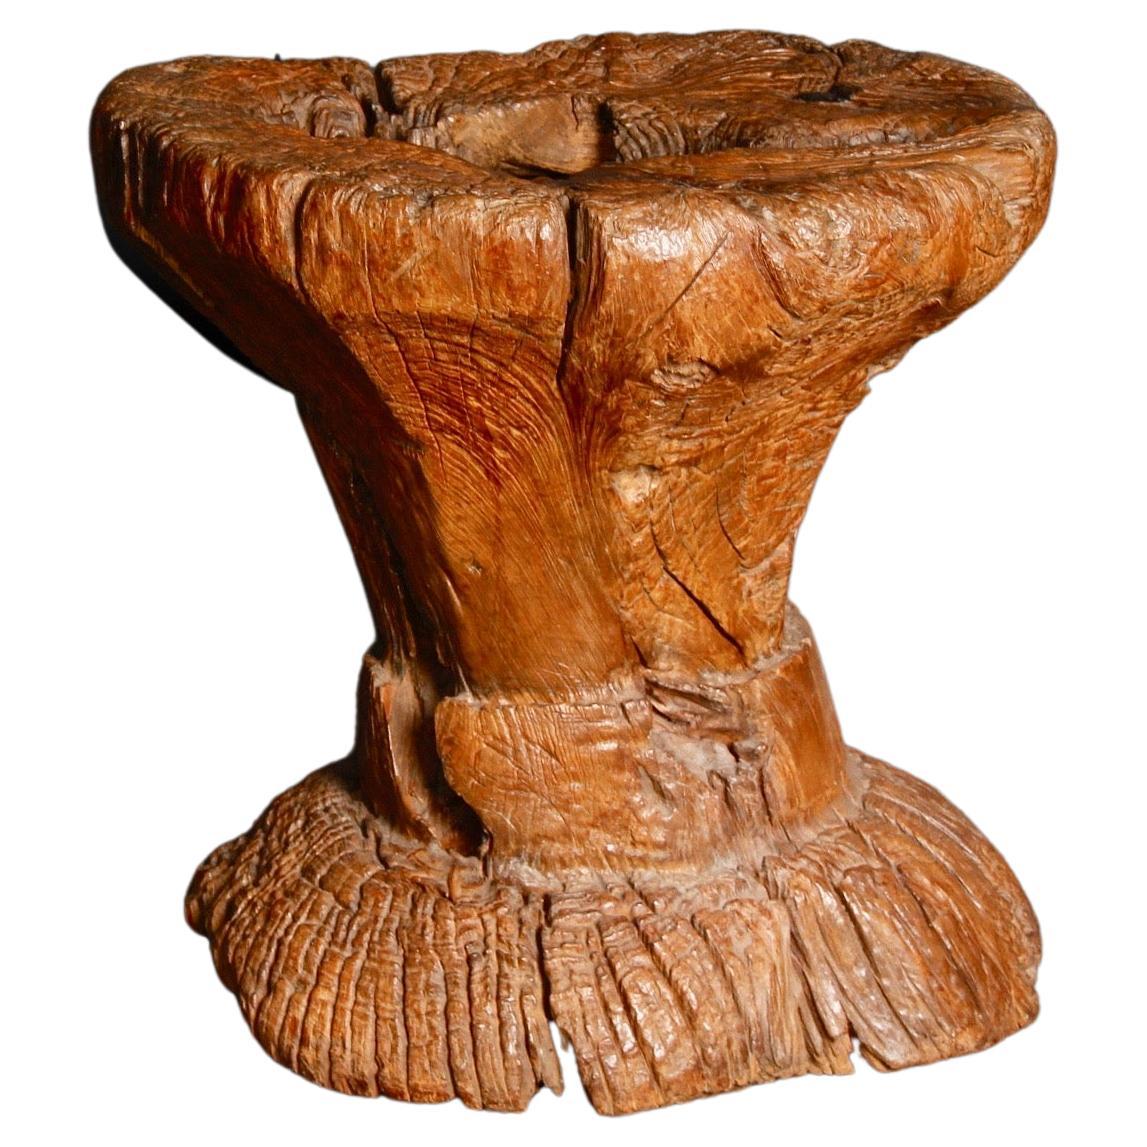 Mortar carved in a probably very old trunk For Sale